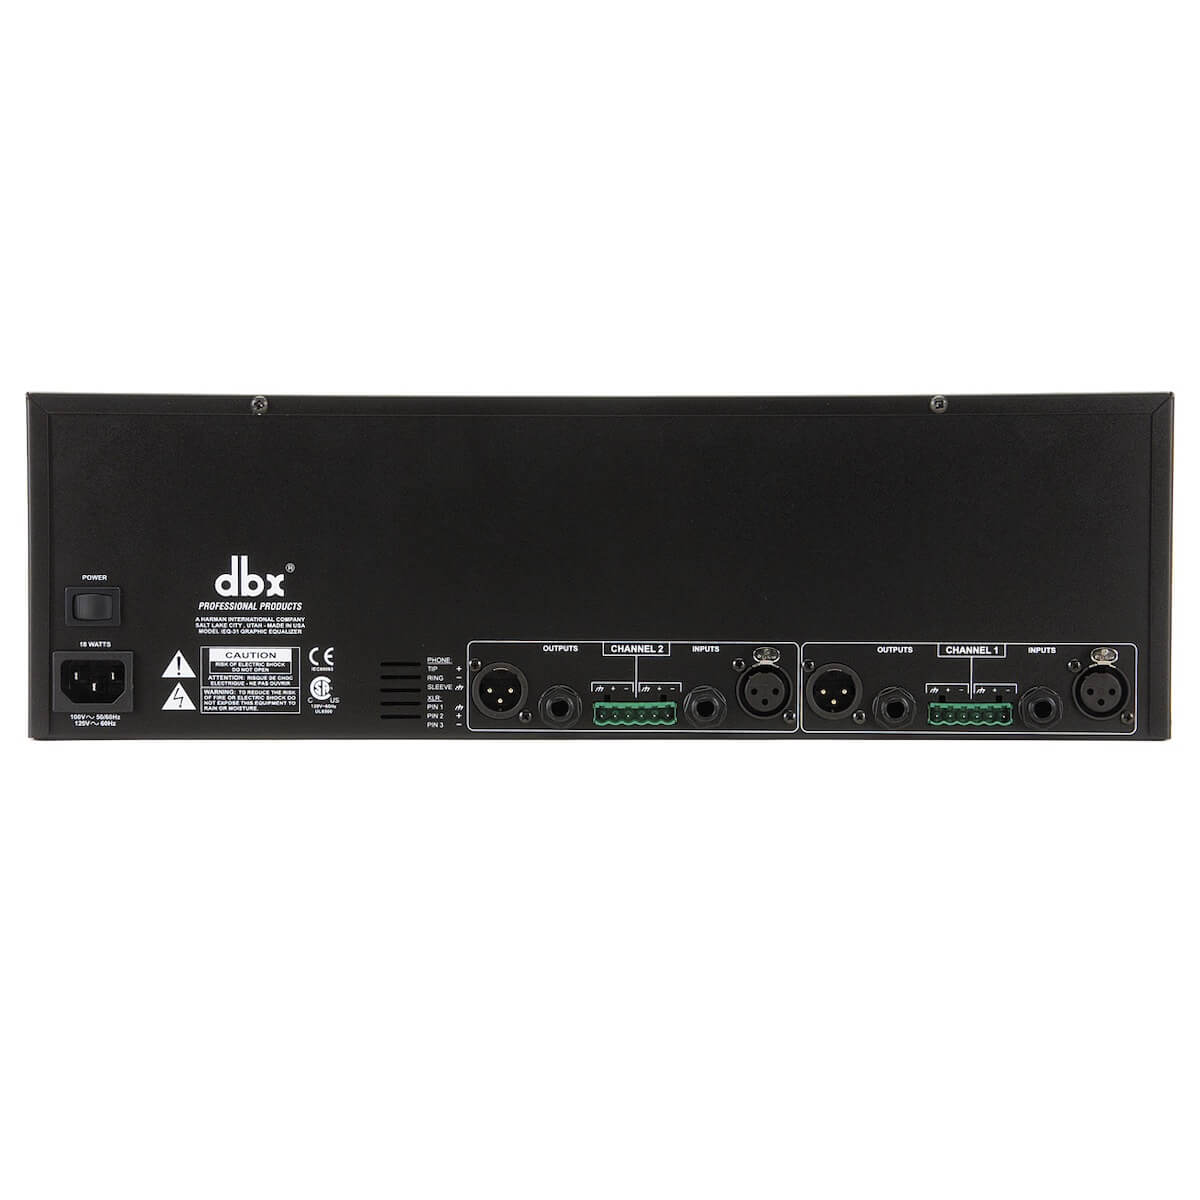 dbx iEQ31 - Dual 31-Band Graphic EQ and Limiter, rear